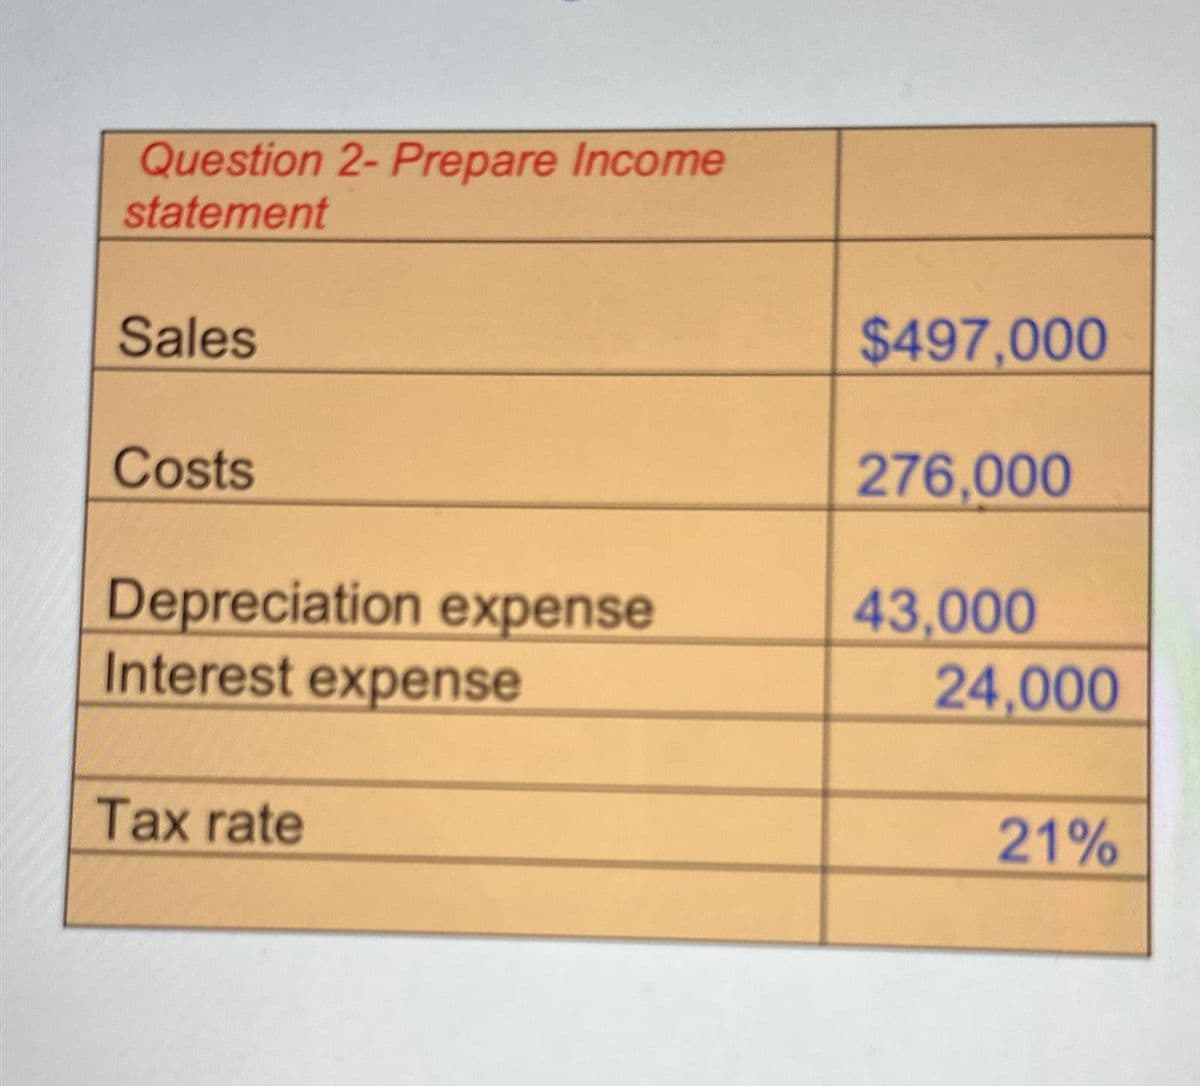 Question 2- Prepare Income
statement
Sales
$497,000
Costs
276,000
Depreciation expense
43,000
Interest expense
24,000
Tax rate
21%